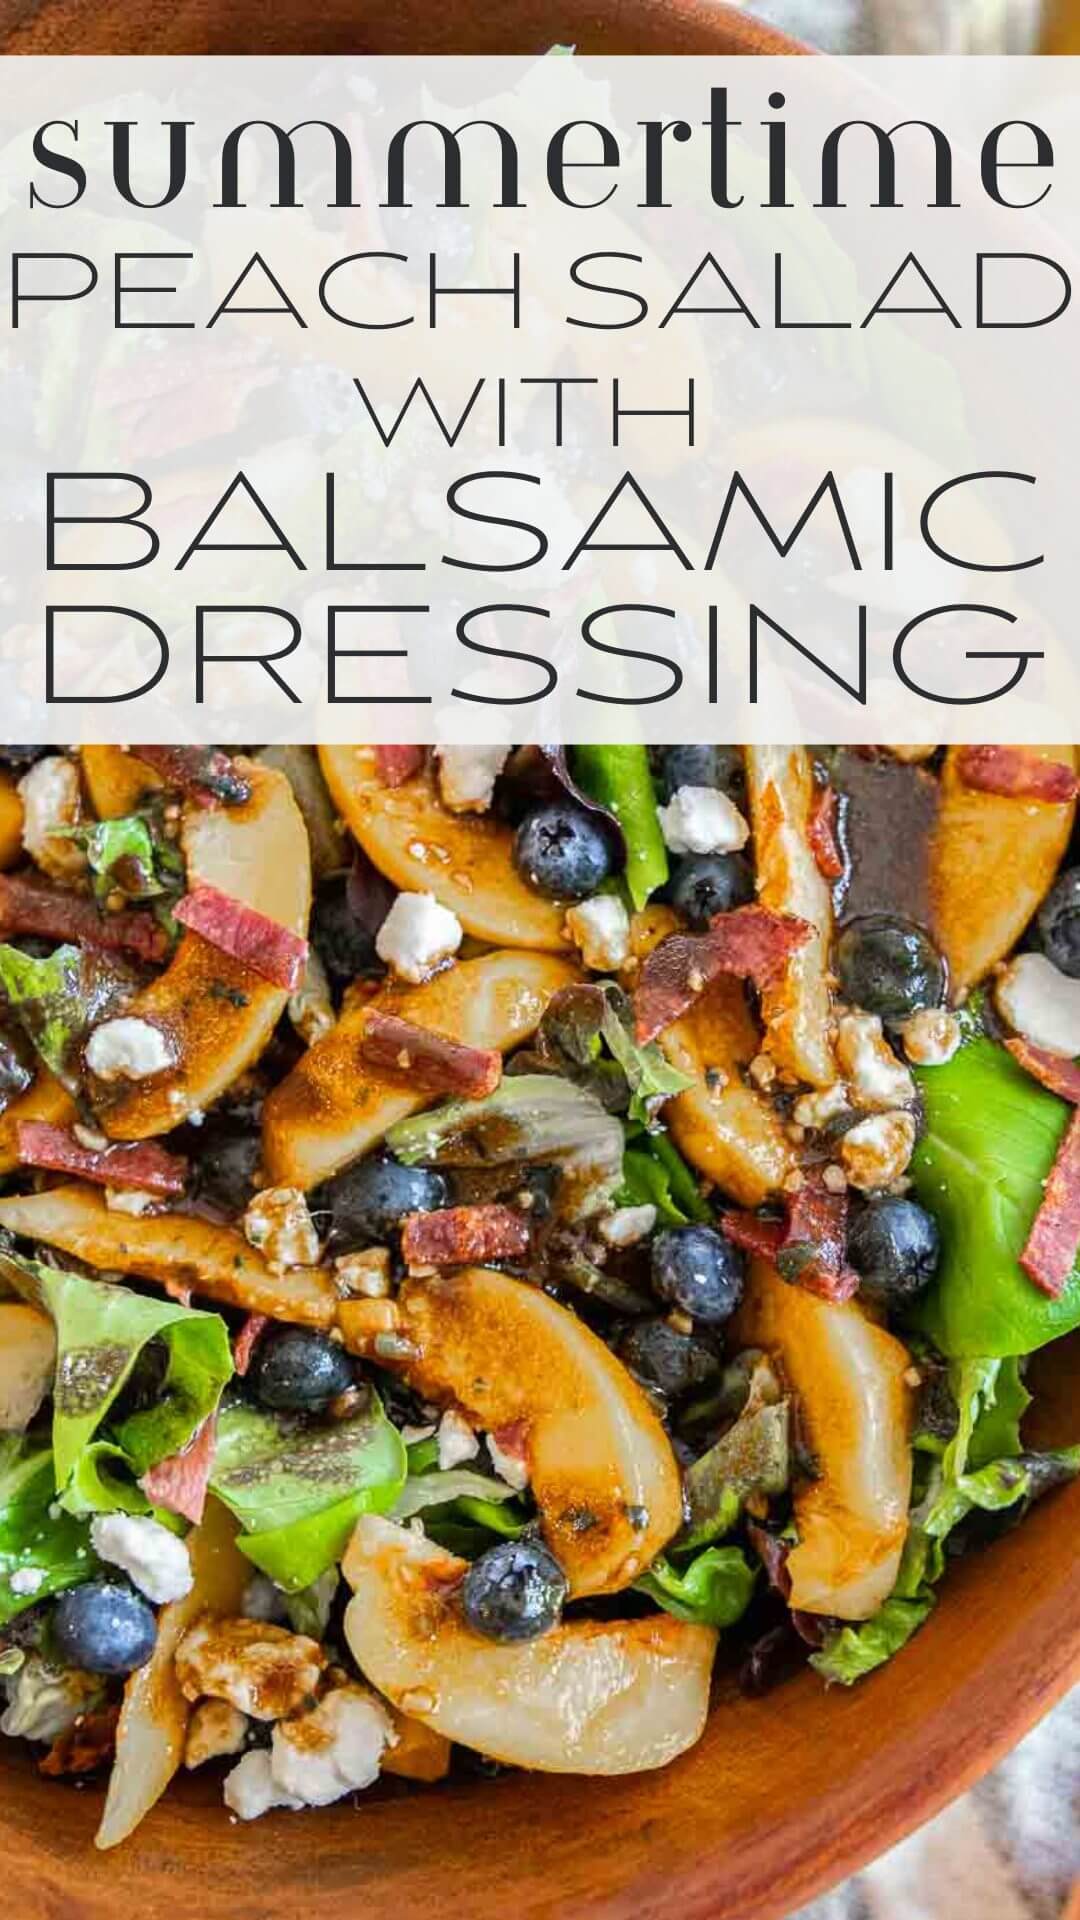 Make this fresh peach salad with bacon, blueberries, feta cheese and balsamic dressing. The combination creates a flavorful salad.